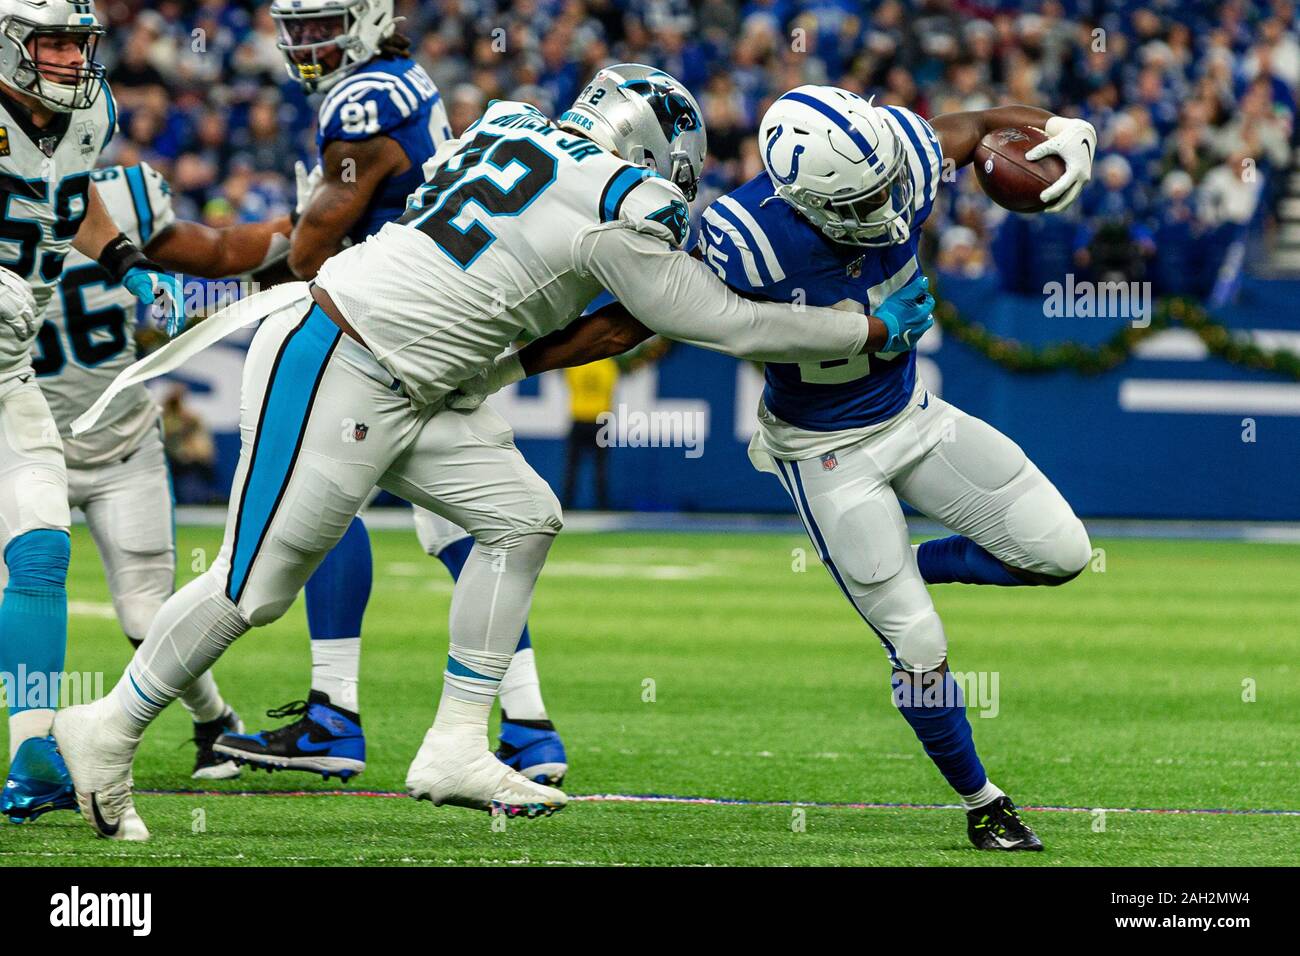 Indianapolis, Indiana, USA. 22nd Dec, 2019. Indianapolis Colts running back Marlon Mack (25) is hit by Carolina Panthers defensive tackle Vernon Butler (92) in the first half of the game between the Carolina Panthers and the Indianapolis Colts at Lucas Oil Stadium, Indianapolis, Indiana. Credit: Scott Stuart/ZUMA Wire/Alamy Live News Stock Photo